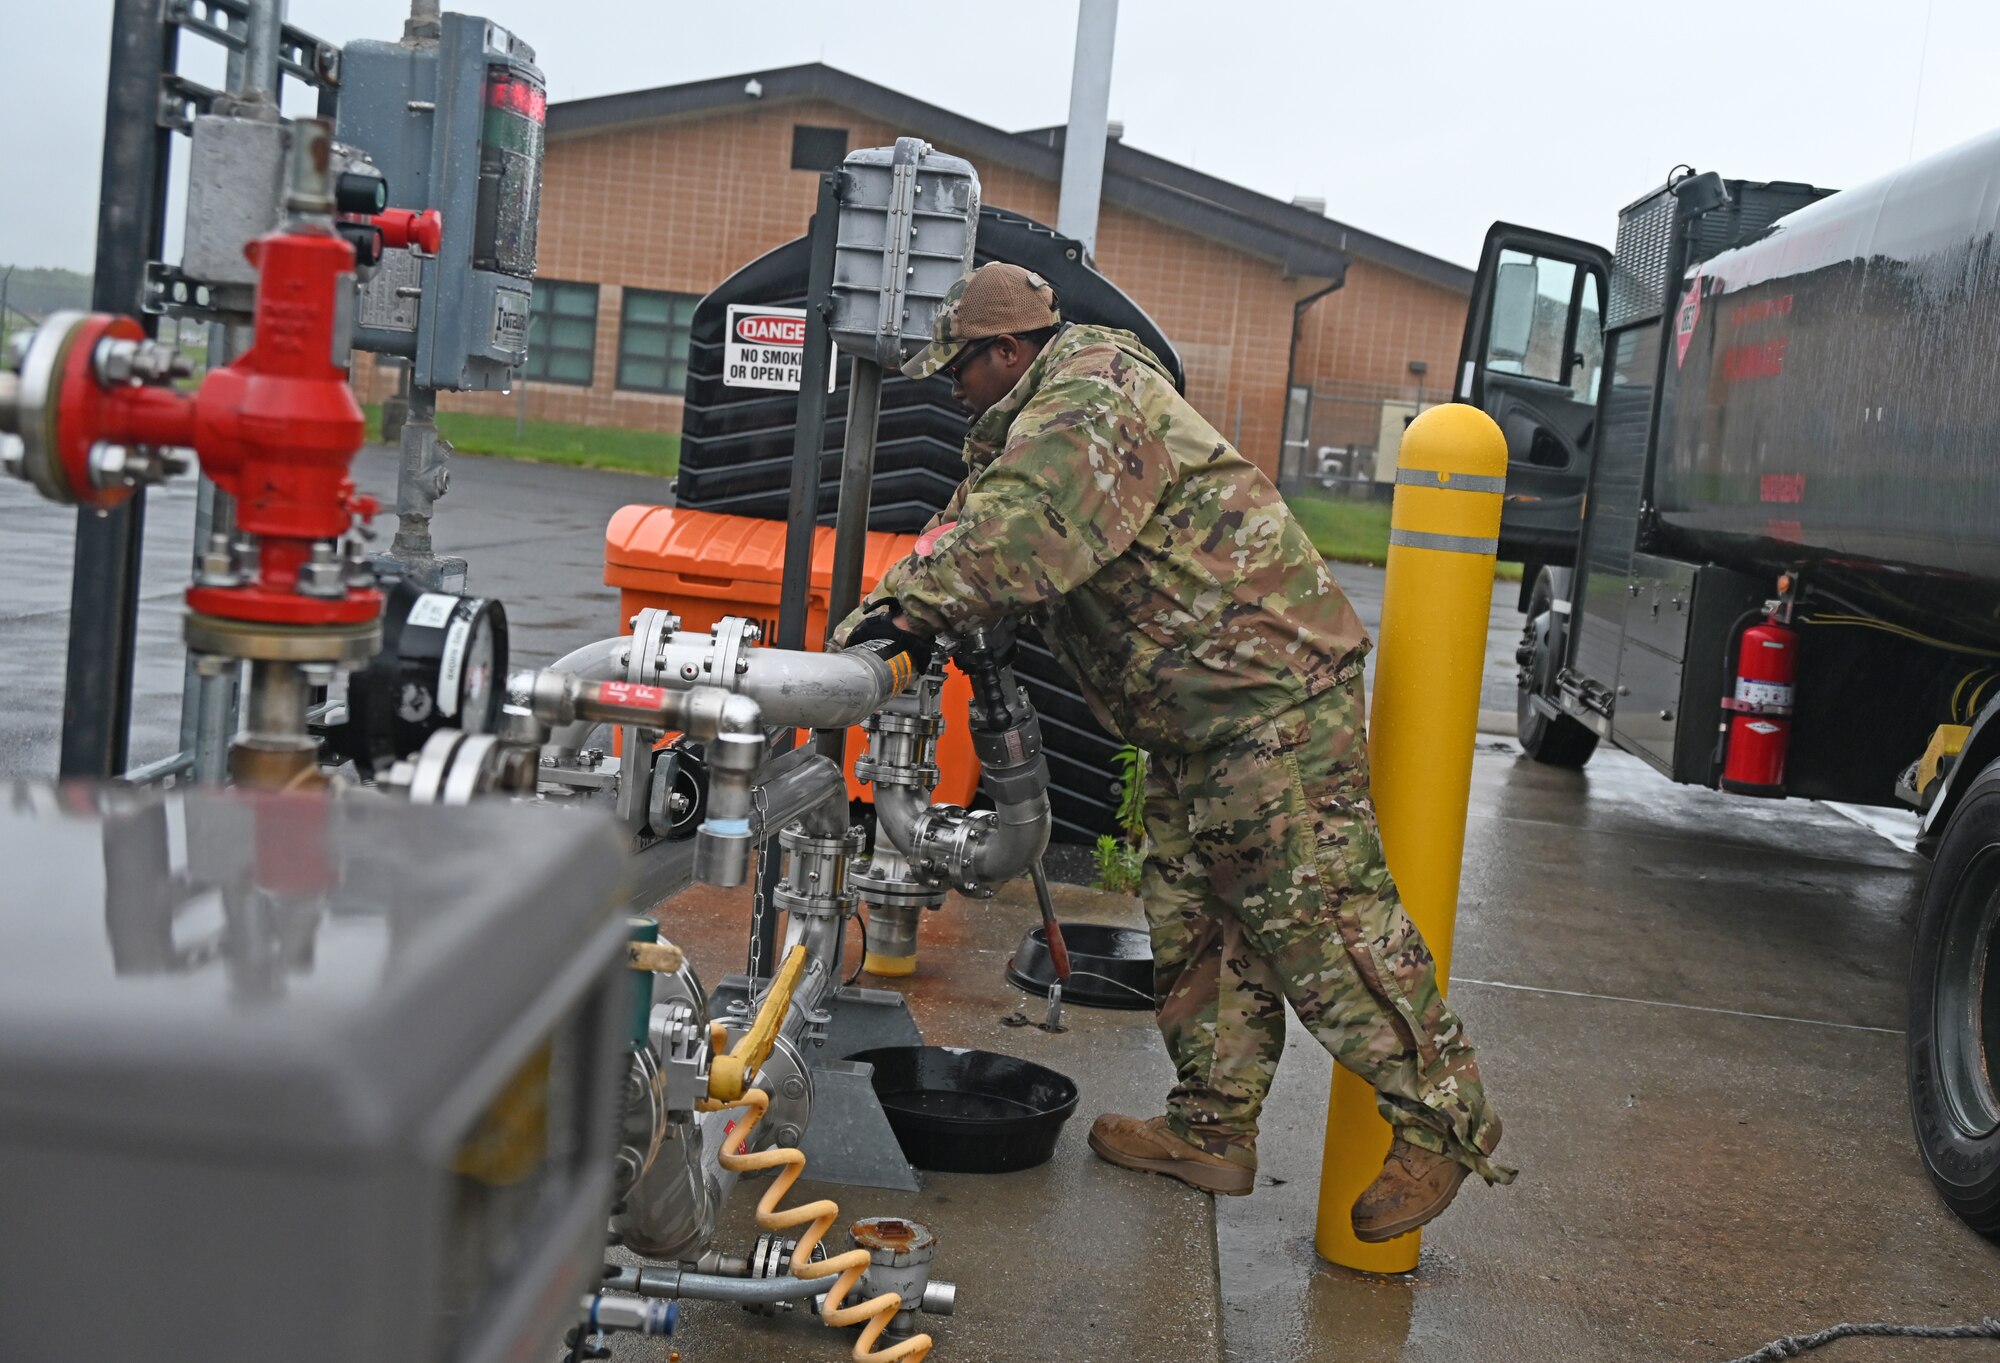 U.S. Air Force Staff Sgt. Terence Bowe, a fuels craftsman assigned to the 175th Mission Support Group, Maryland Air National Guard, puts away equipment after filling up a fuel truck at Warfield Air National Guard Base, Middle River, Md., June 23, 2022.